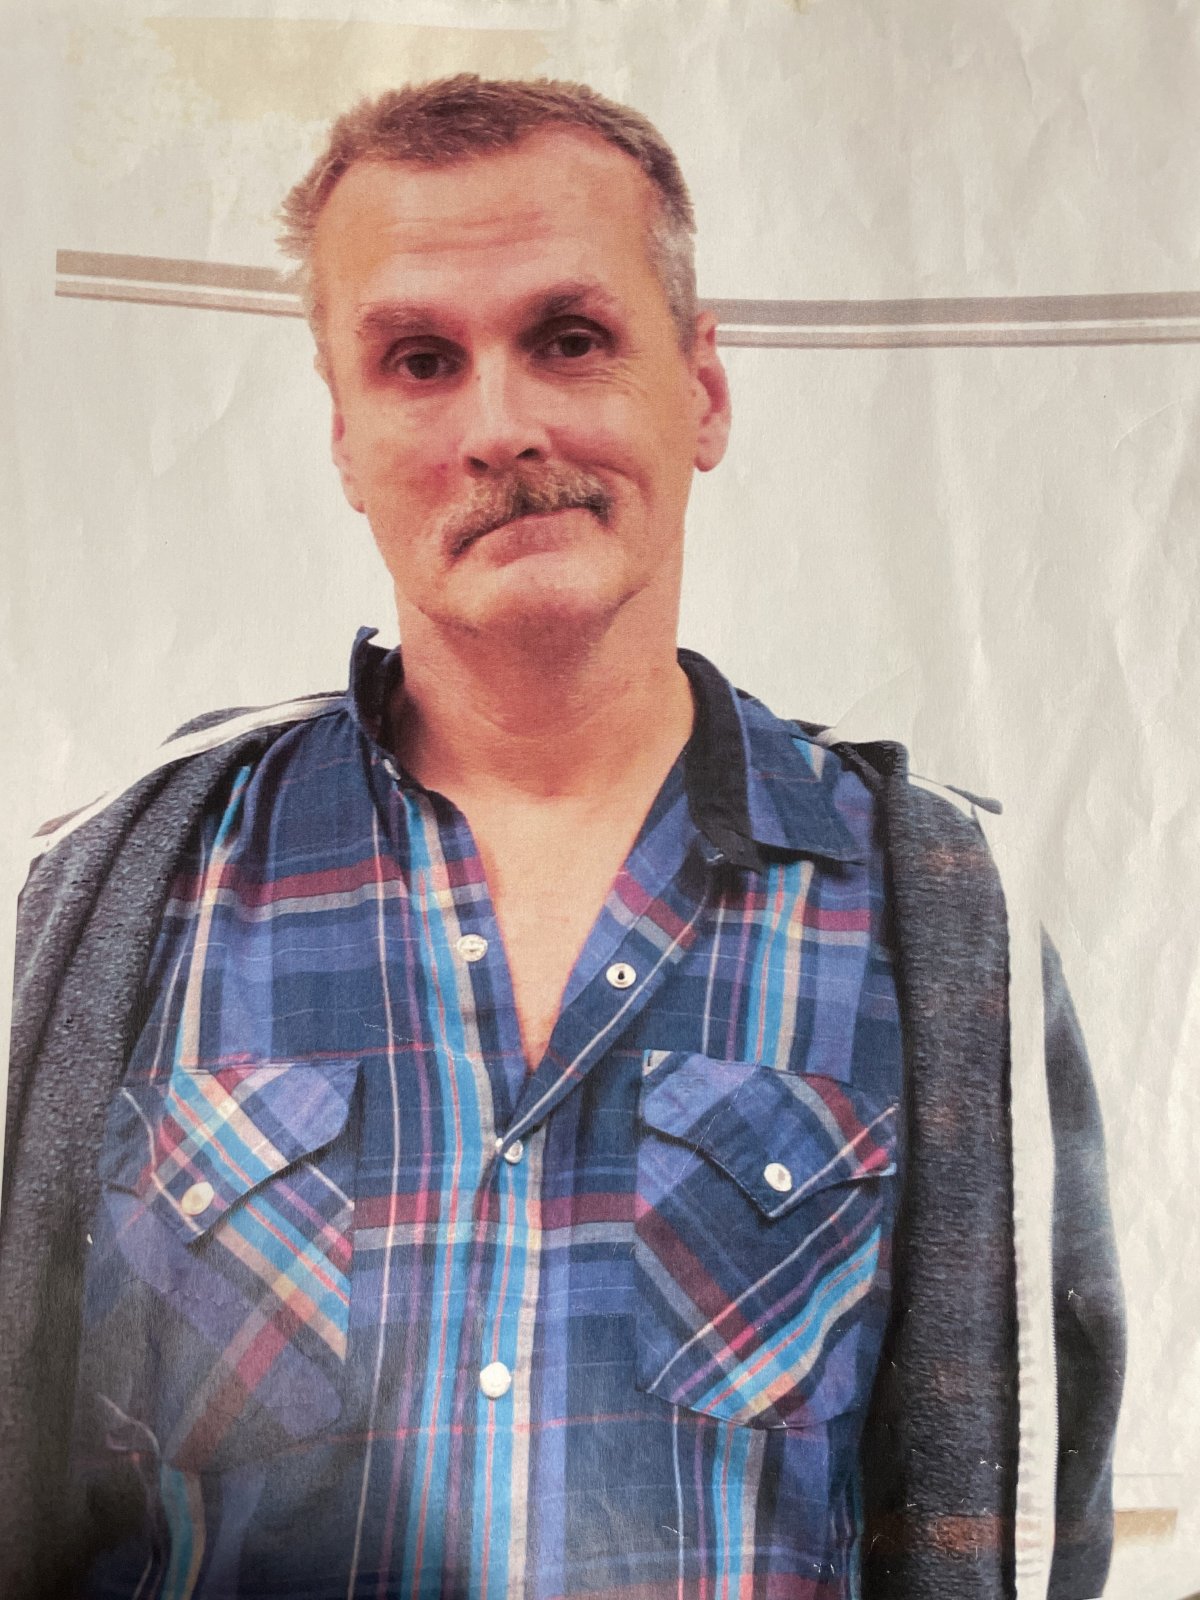 Kenneth Wetherald, 58, was last seen on 96 Avenue in Surrey, B.C. around 8 a.m. on Sat. June 18, 2022. He communicates via sign language.